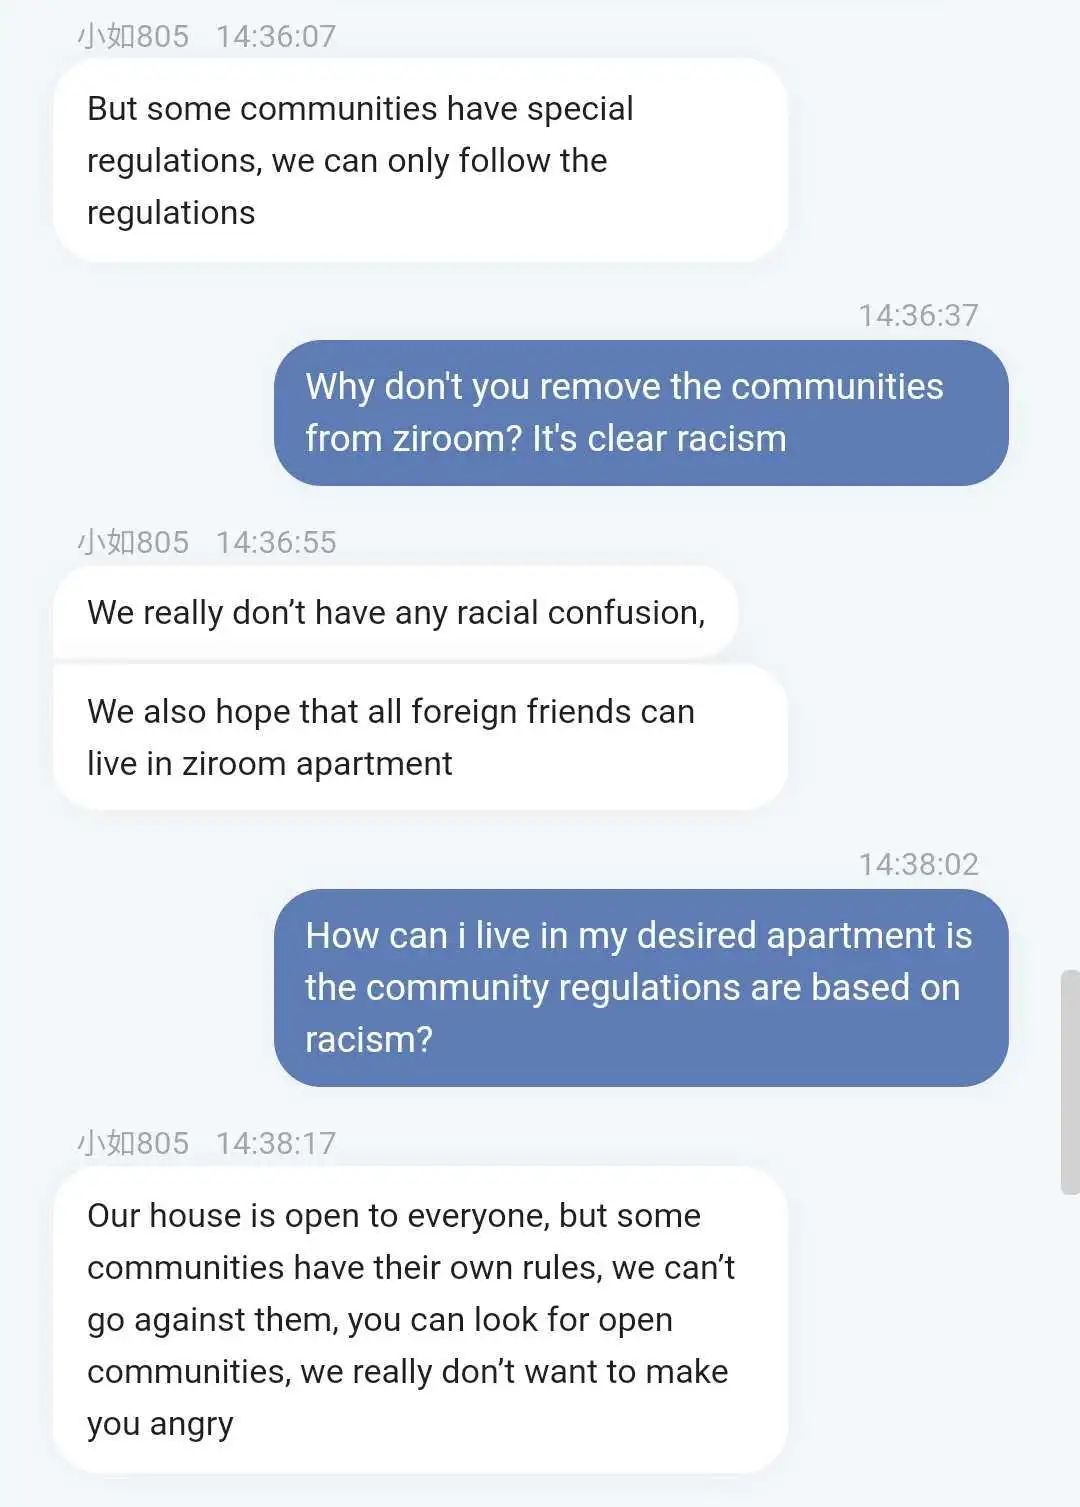 They are making excuses to hide the racism​